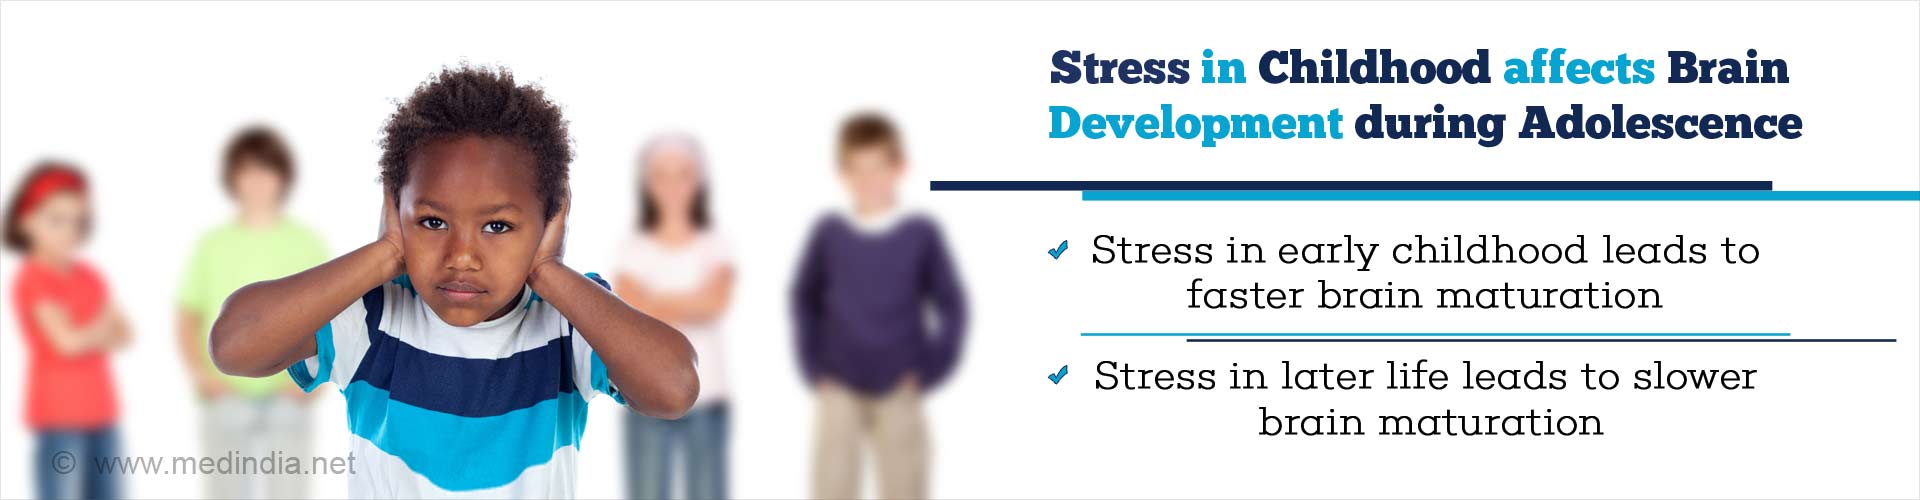 Stress in Childhood affects Brain Development during Adolescence. Stress in early childhood leads to faster brain maturation. Stress in later life leads to slower brain maturation.